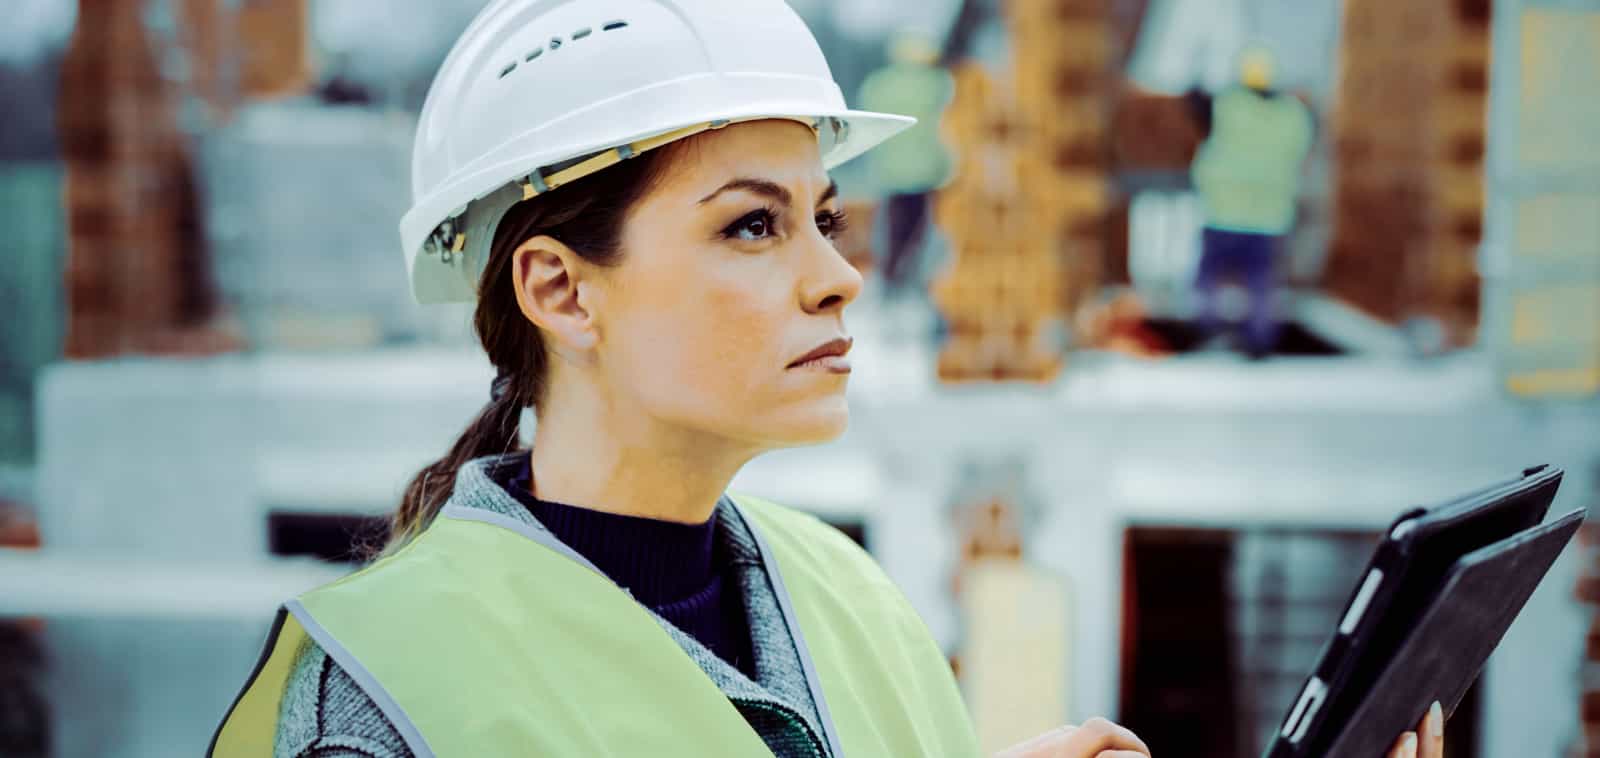 A woman in a hardhat checks a worksite based on information on a tablet.